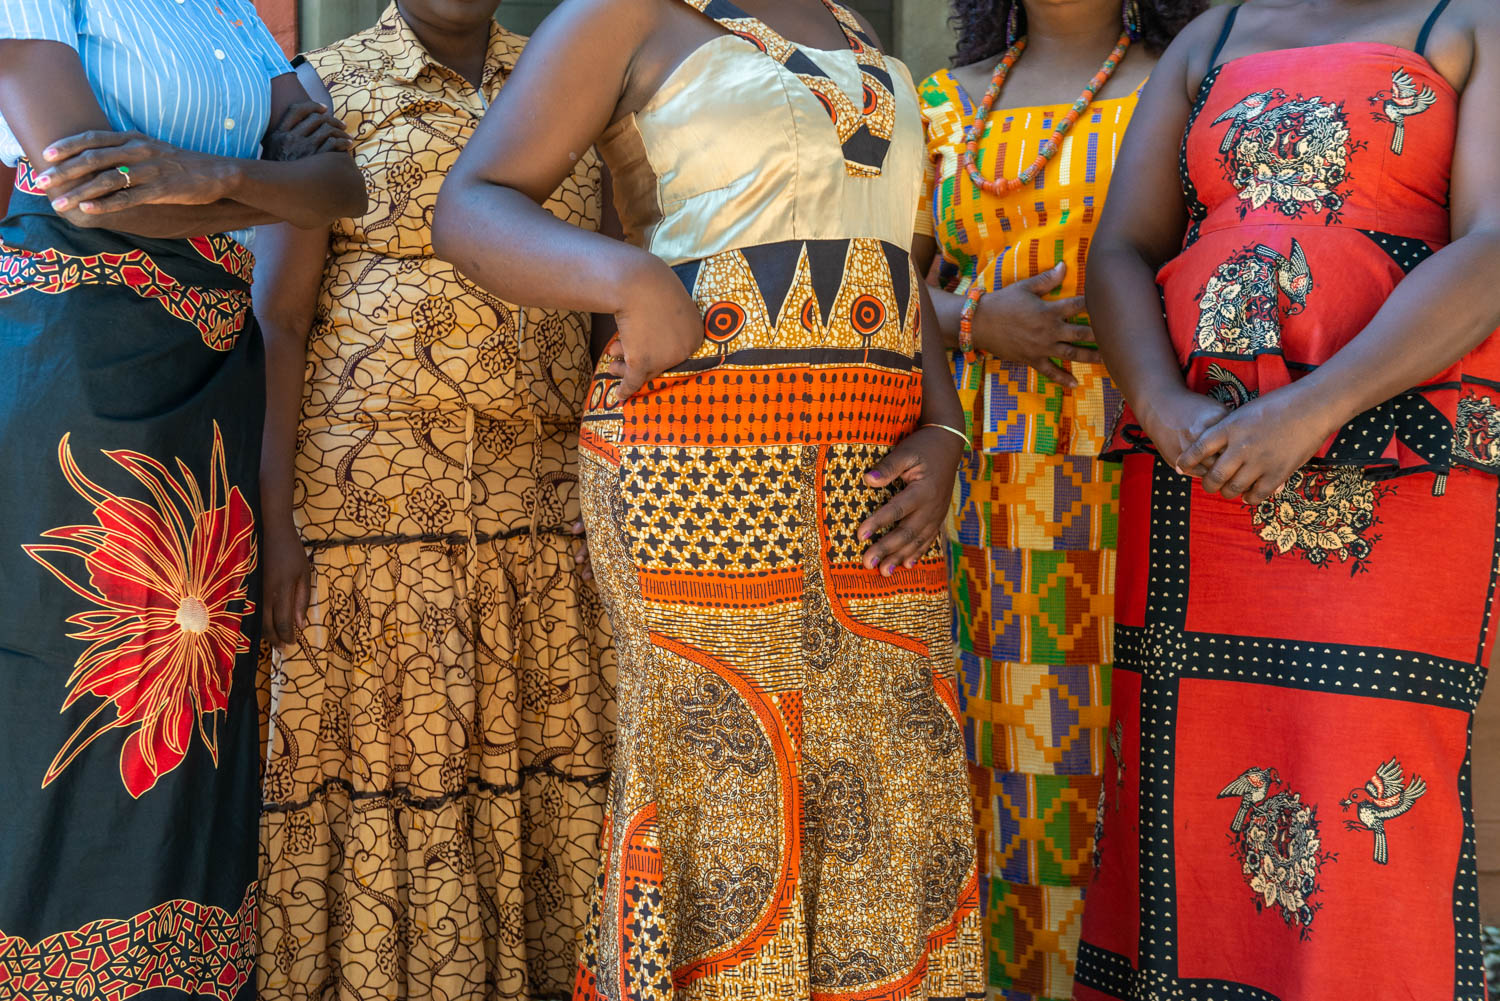 Women wearing dresses made out of chitenge cloth